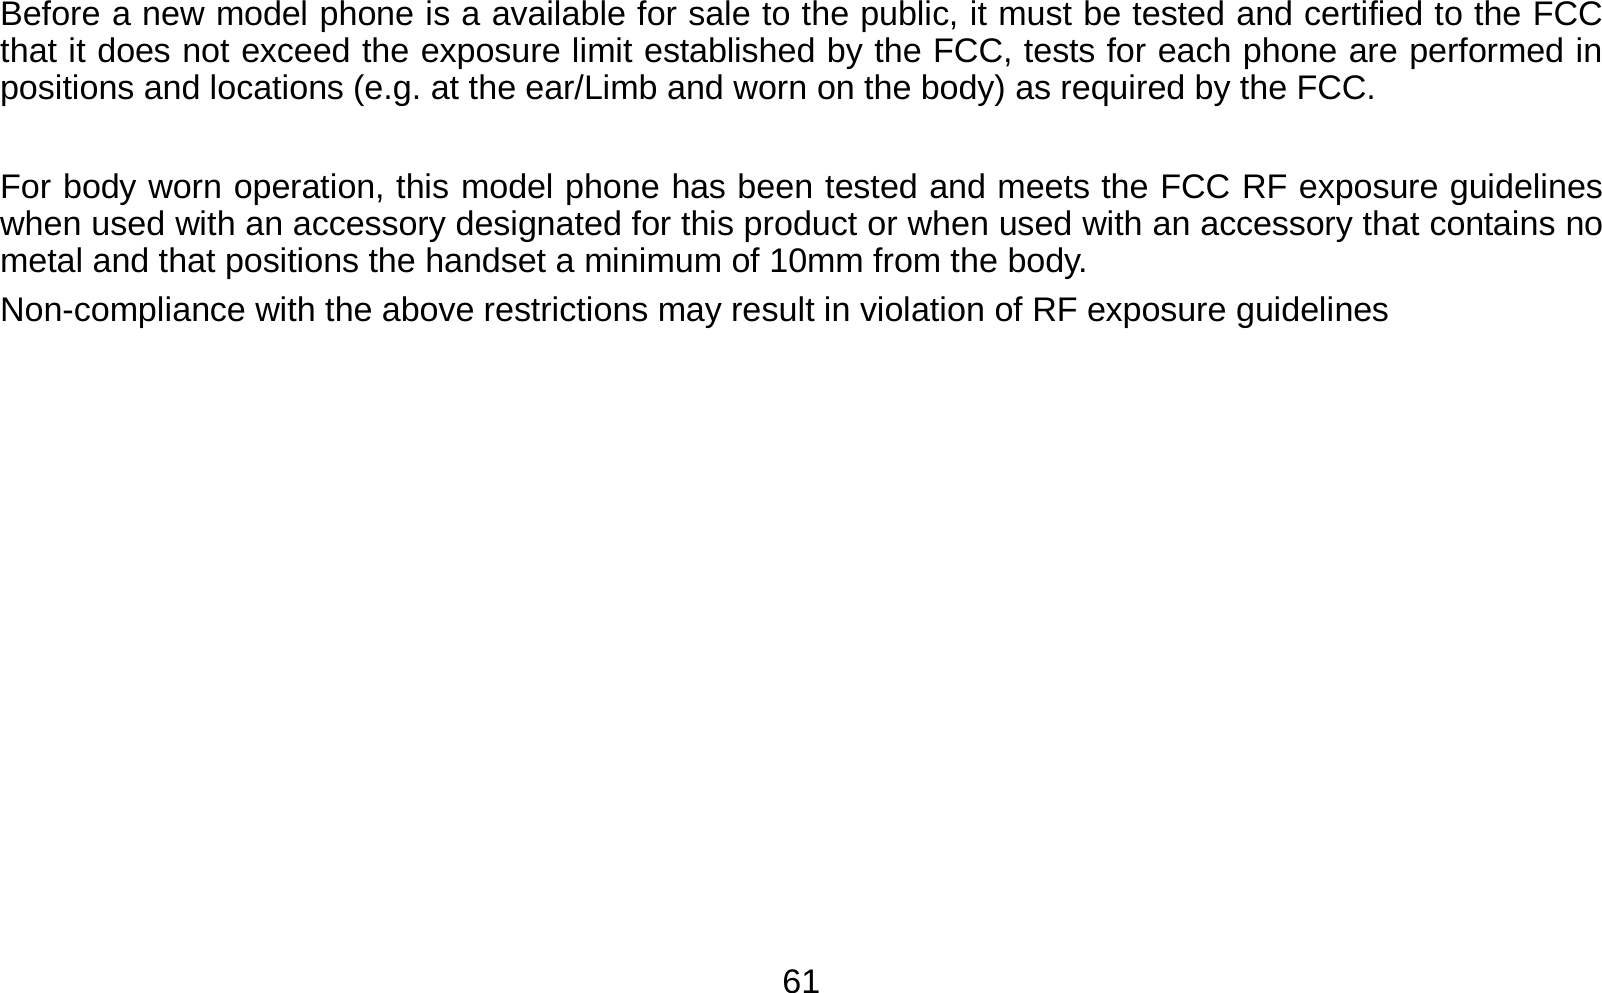   61Before a new model phone is a available for sale to the public, it must be tested and certified to the FCC that it does not exceed the exposure limit established by the FCC, tests for each phone are performed in positions and locations (e.g. at the ear/Limb and worn on the body) as required by the FCC.    For body worn operation, this model phone has been tested and meets the FCC RF exposure guidelines when used with an accessory designated for this product or when used with an accessory that contains no metal and that positions the handset a minimum of 10mm from the body.   Non-compliance with the above restrictions may result in violation of RF exposure guidelines  